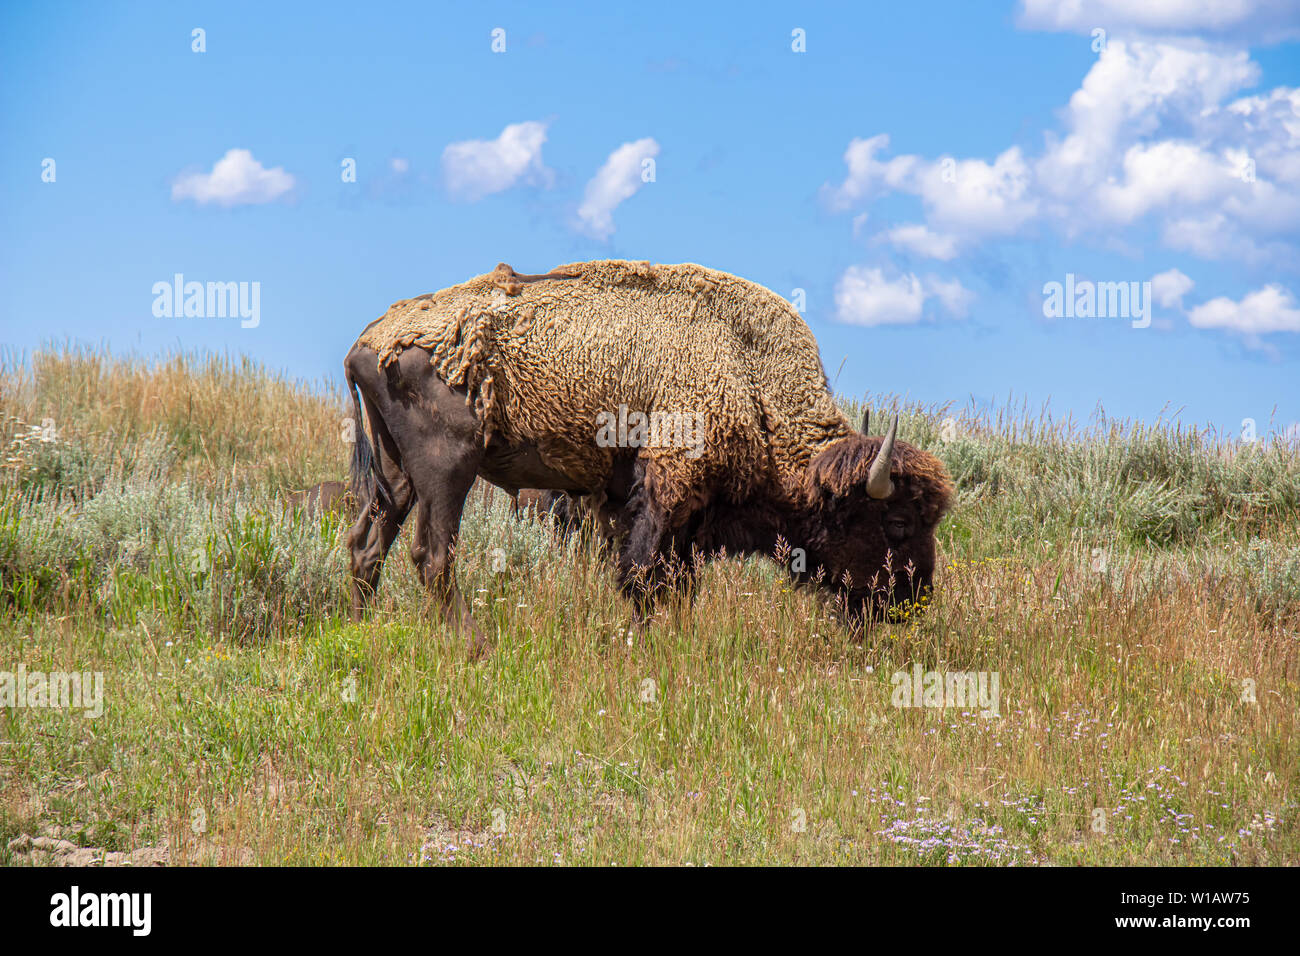 An American bison (Bison bison) just beginning to shed its winter coat in Yellowstone National Park, Wyoming, USA. Stock Photo